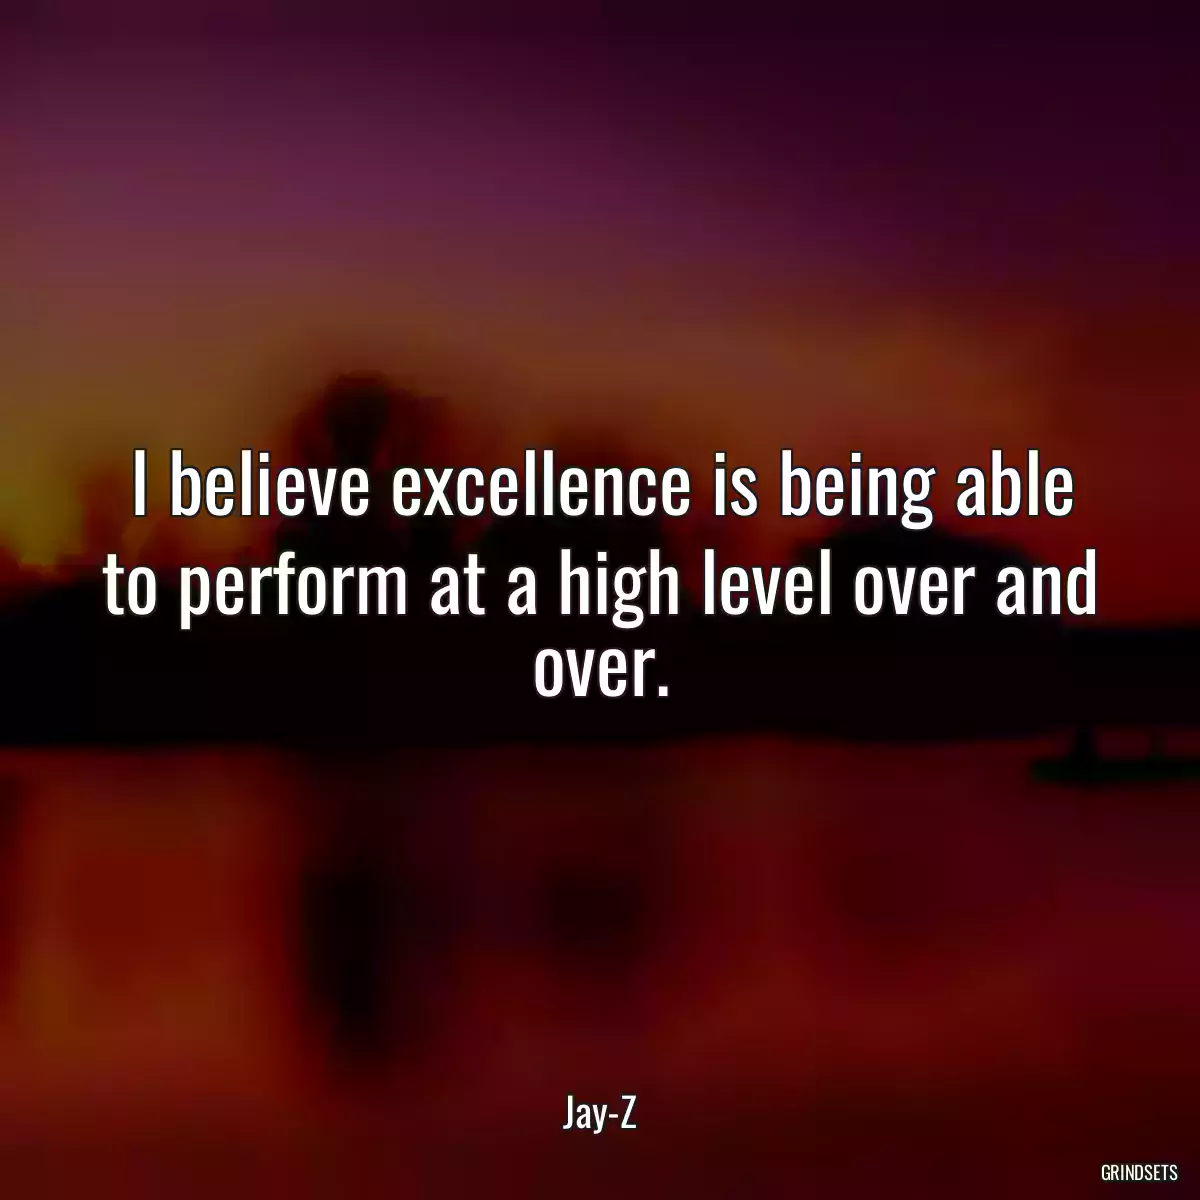 I believe excellence is being able to perform at a high level over and over.